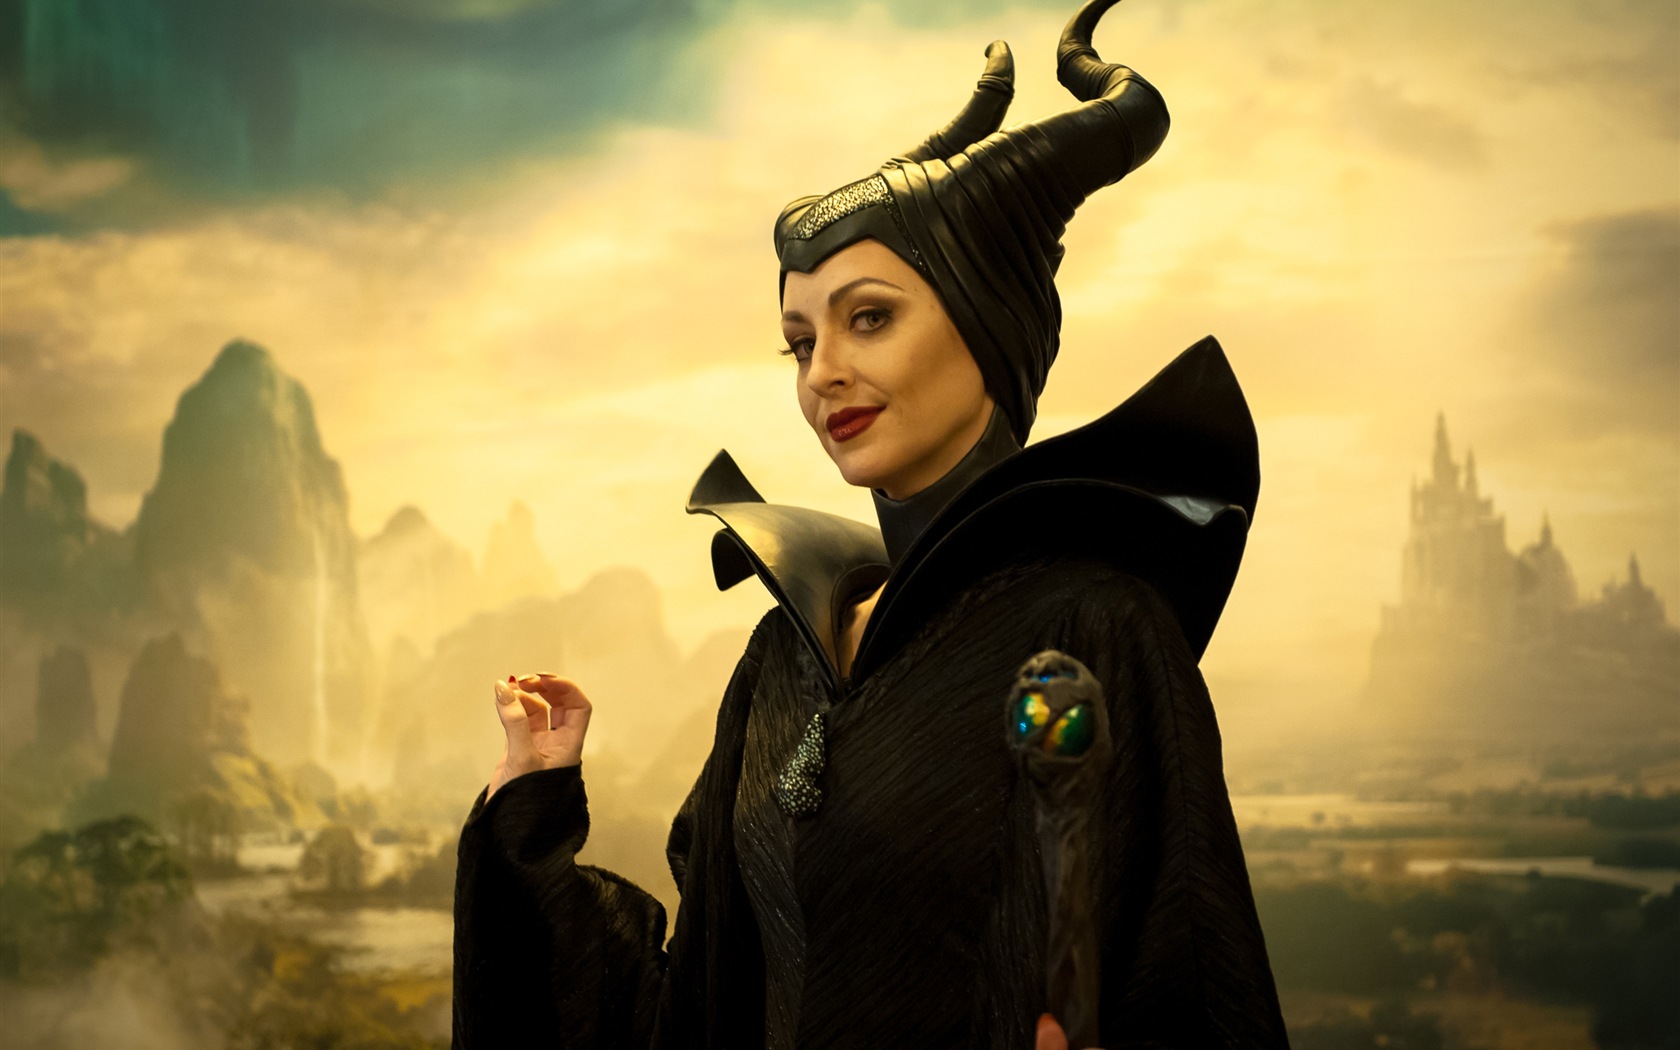 Maleficent 2014 HD movie wallpapers #11 - 1680x1050